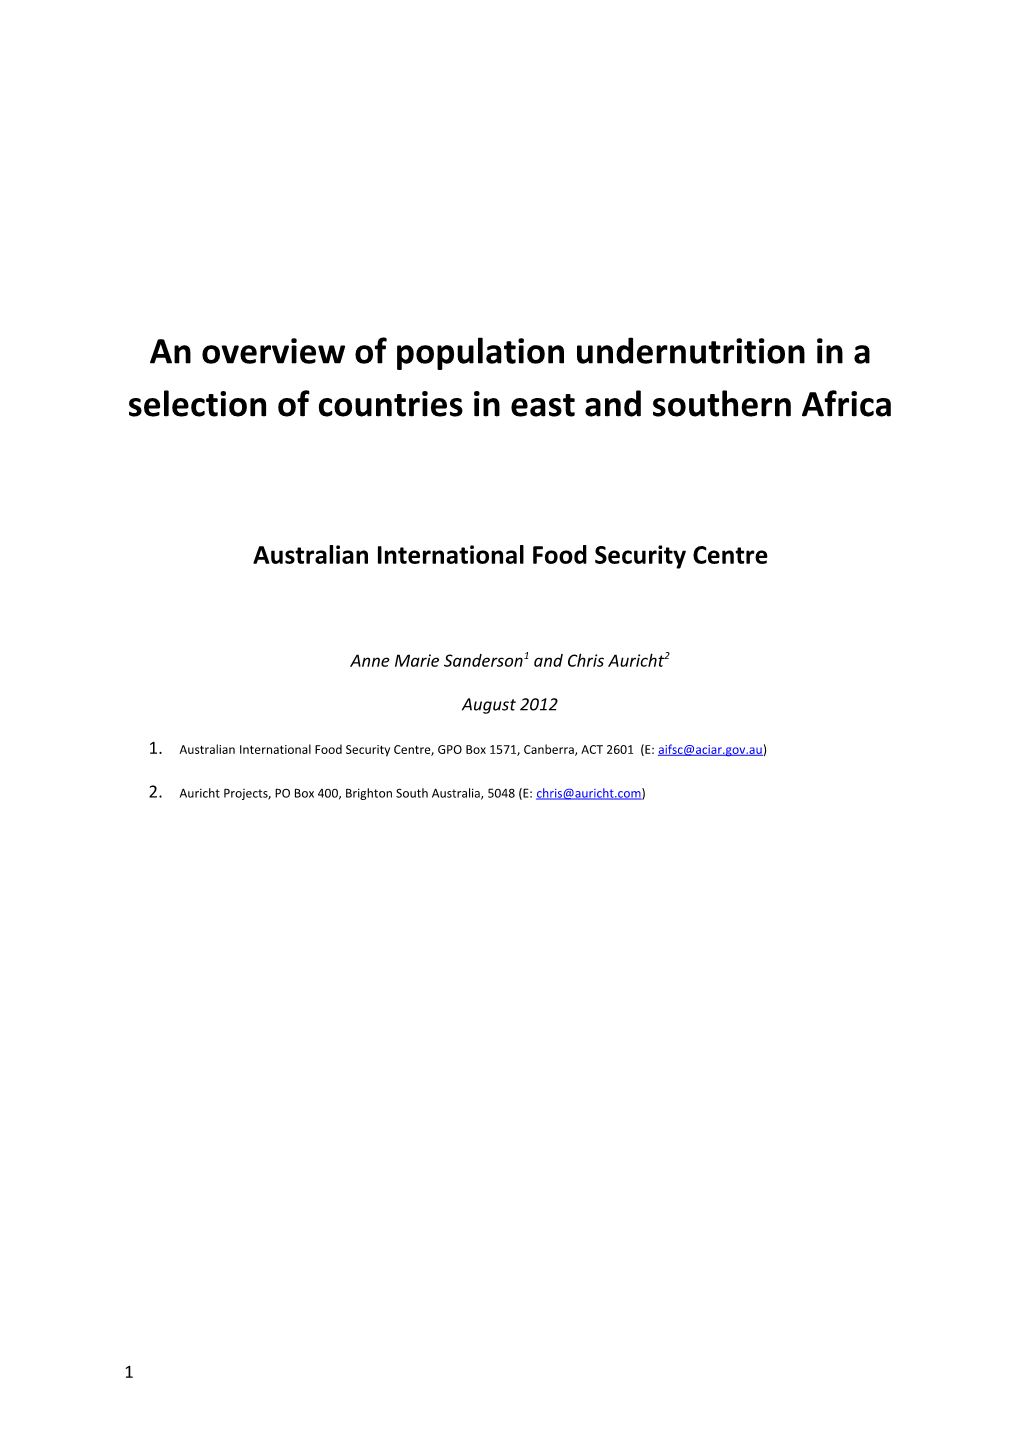 An Overview of Population Under-Nutrition in a Selection of Countries in East and Southern